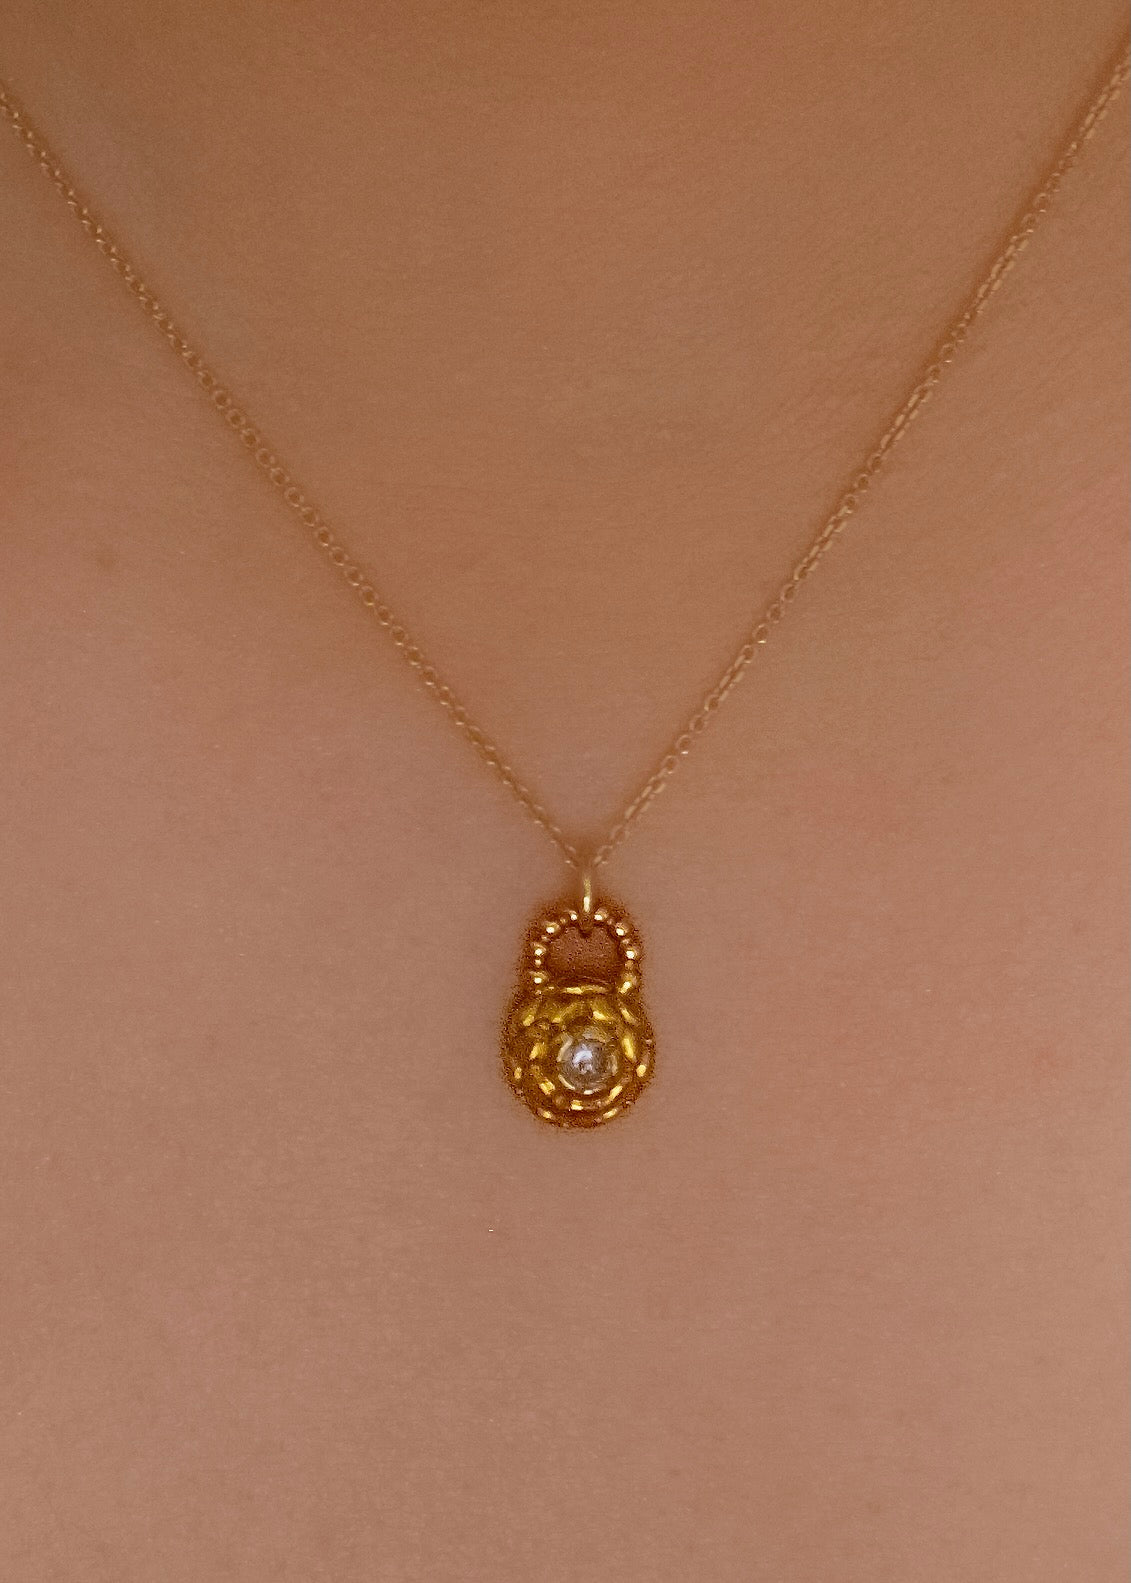 Featuring intricate hand-carved beads that center around a brilliant rose cut diamond, the Marquis necklace is fit for royalty and reimagined for everyday wear. 